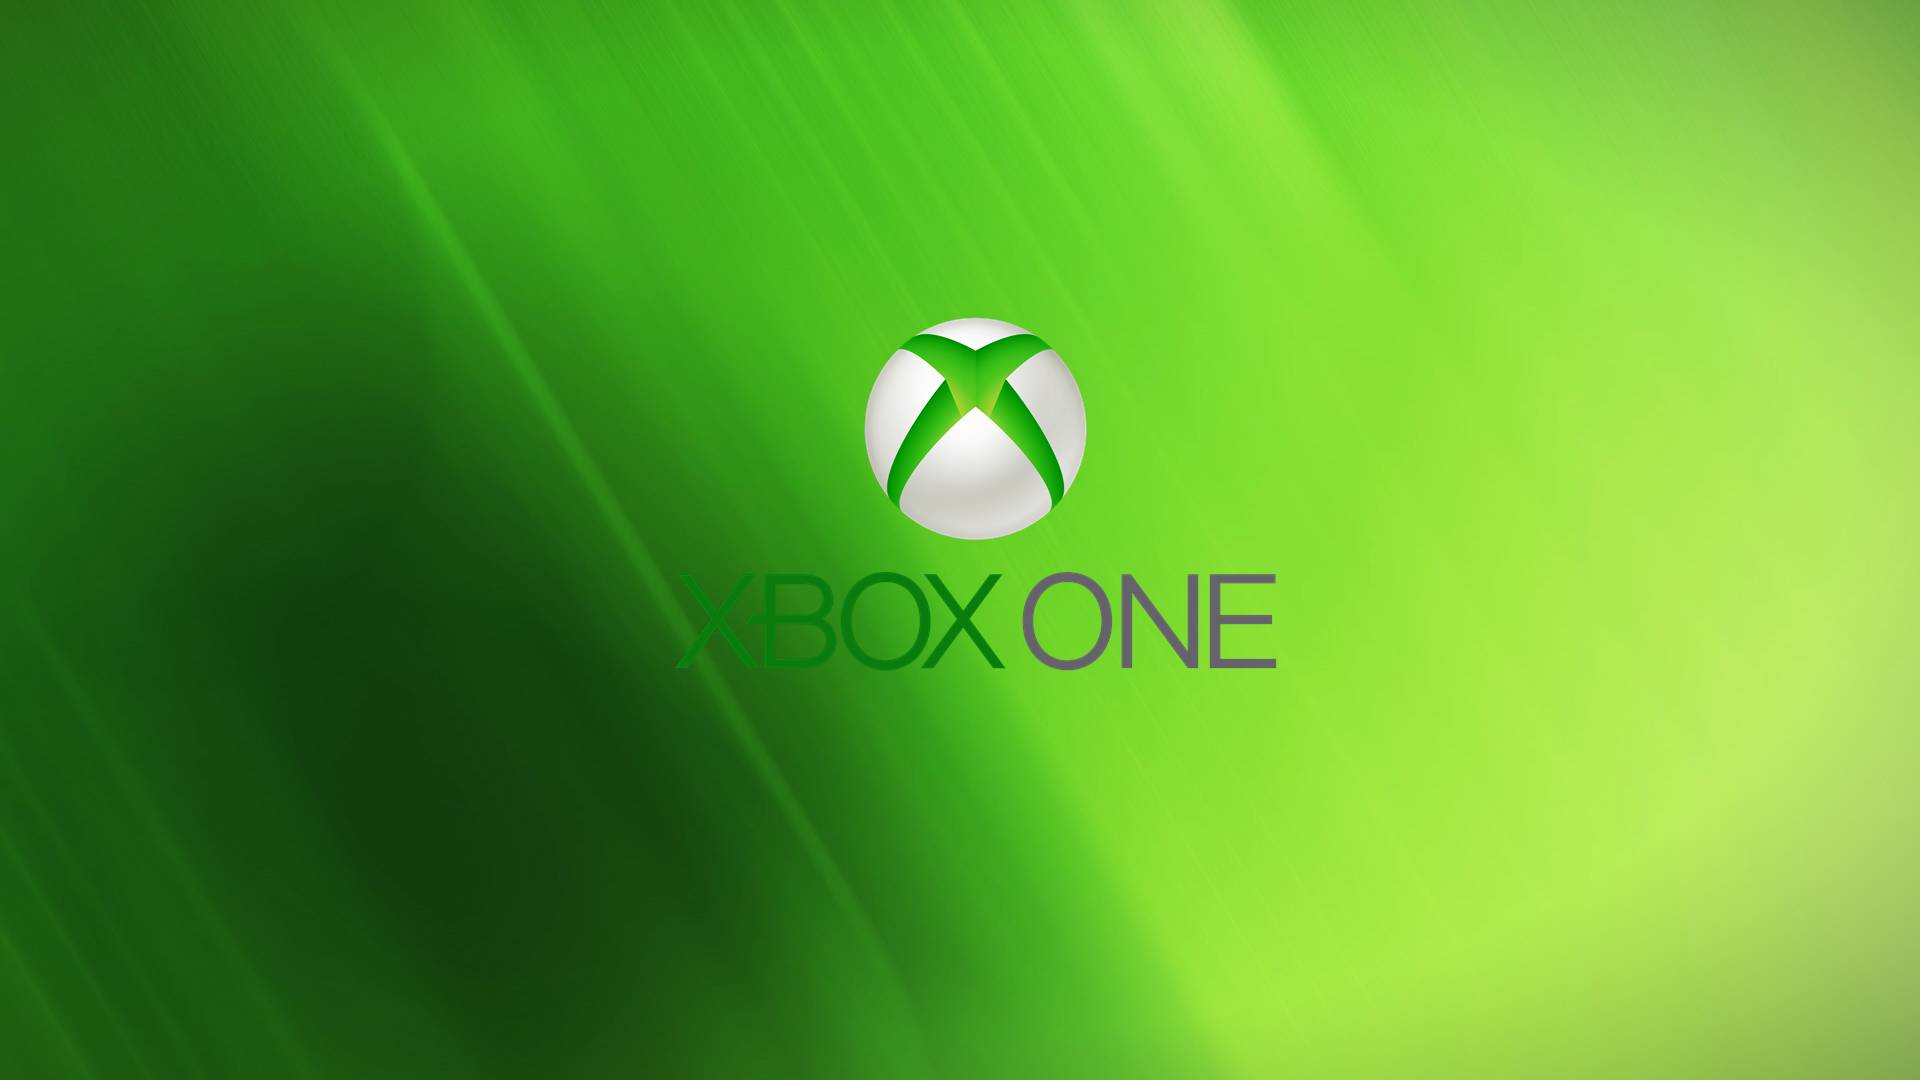 Live Wallpaper for Xbox One